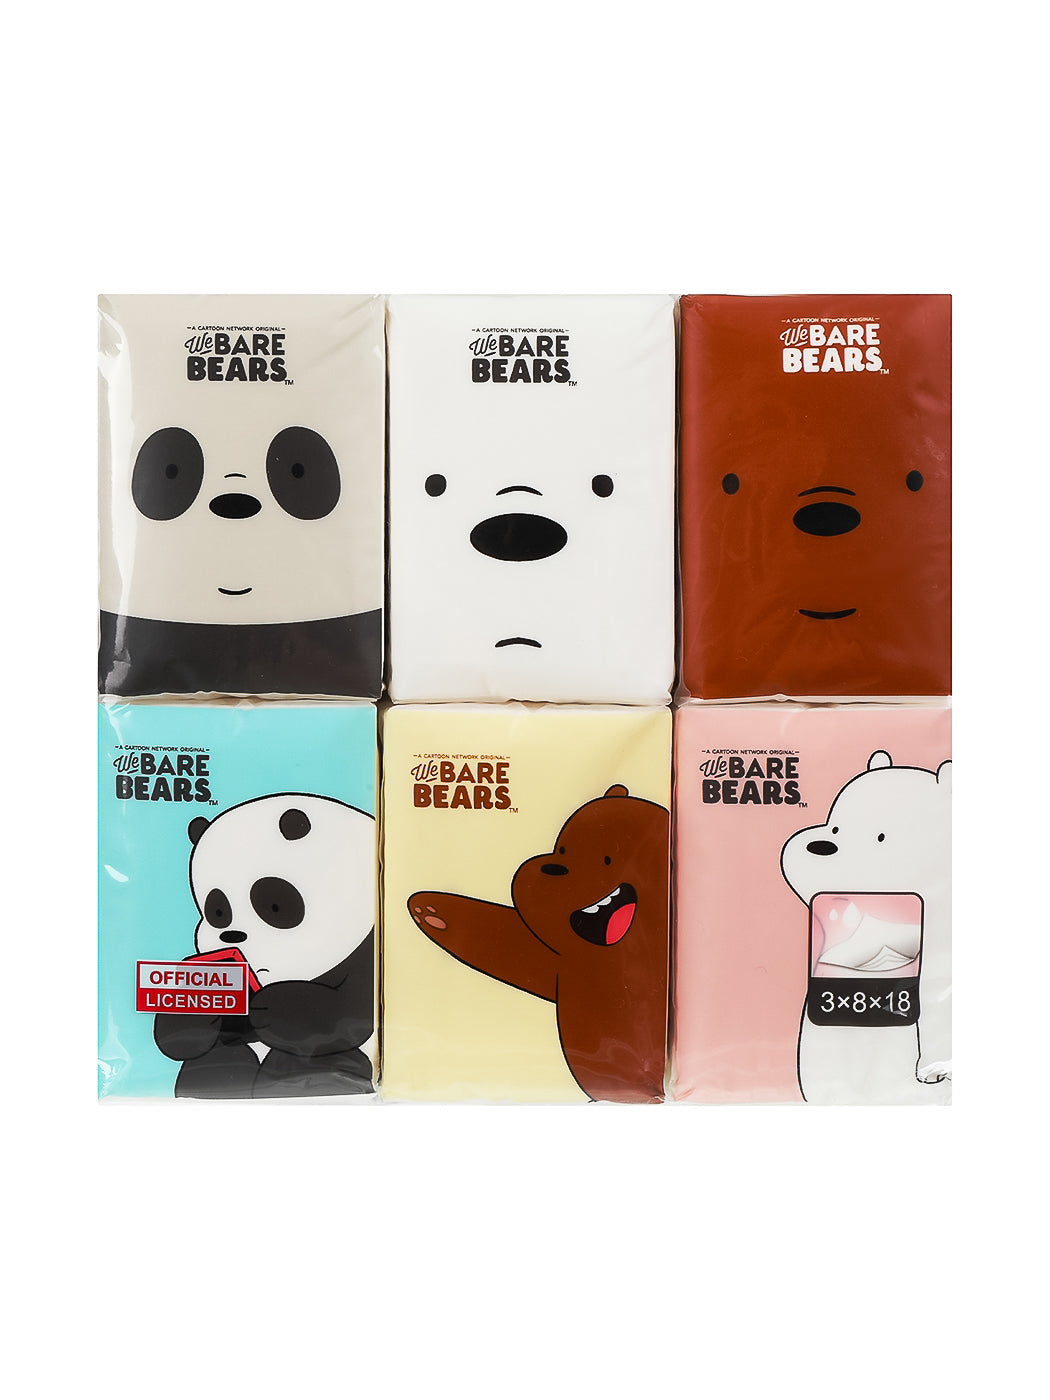 MINISO WE BARE BEARS SIMPLE TISSUES (8SHEETS*3-LAYER) 0200039971 TISSUE